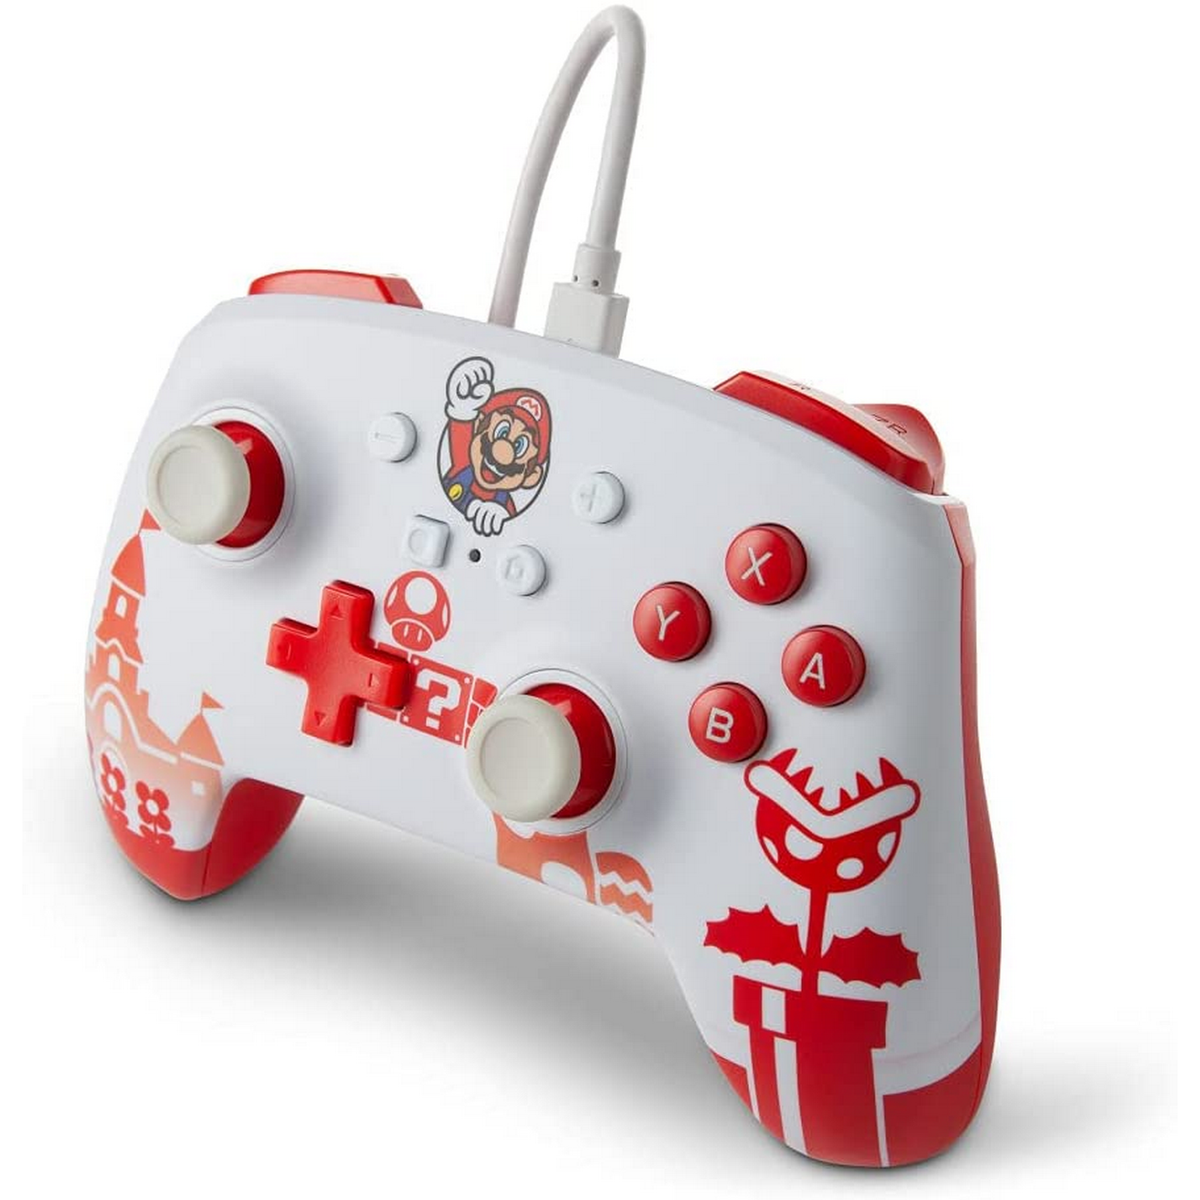 WIRED Rot/Weiß POWER PA1519186-01NSW CONTR RED/WHITE A MARIO Controller